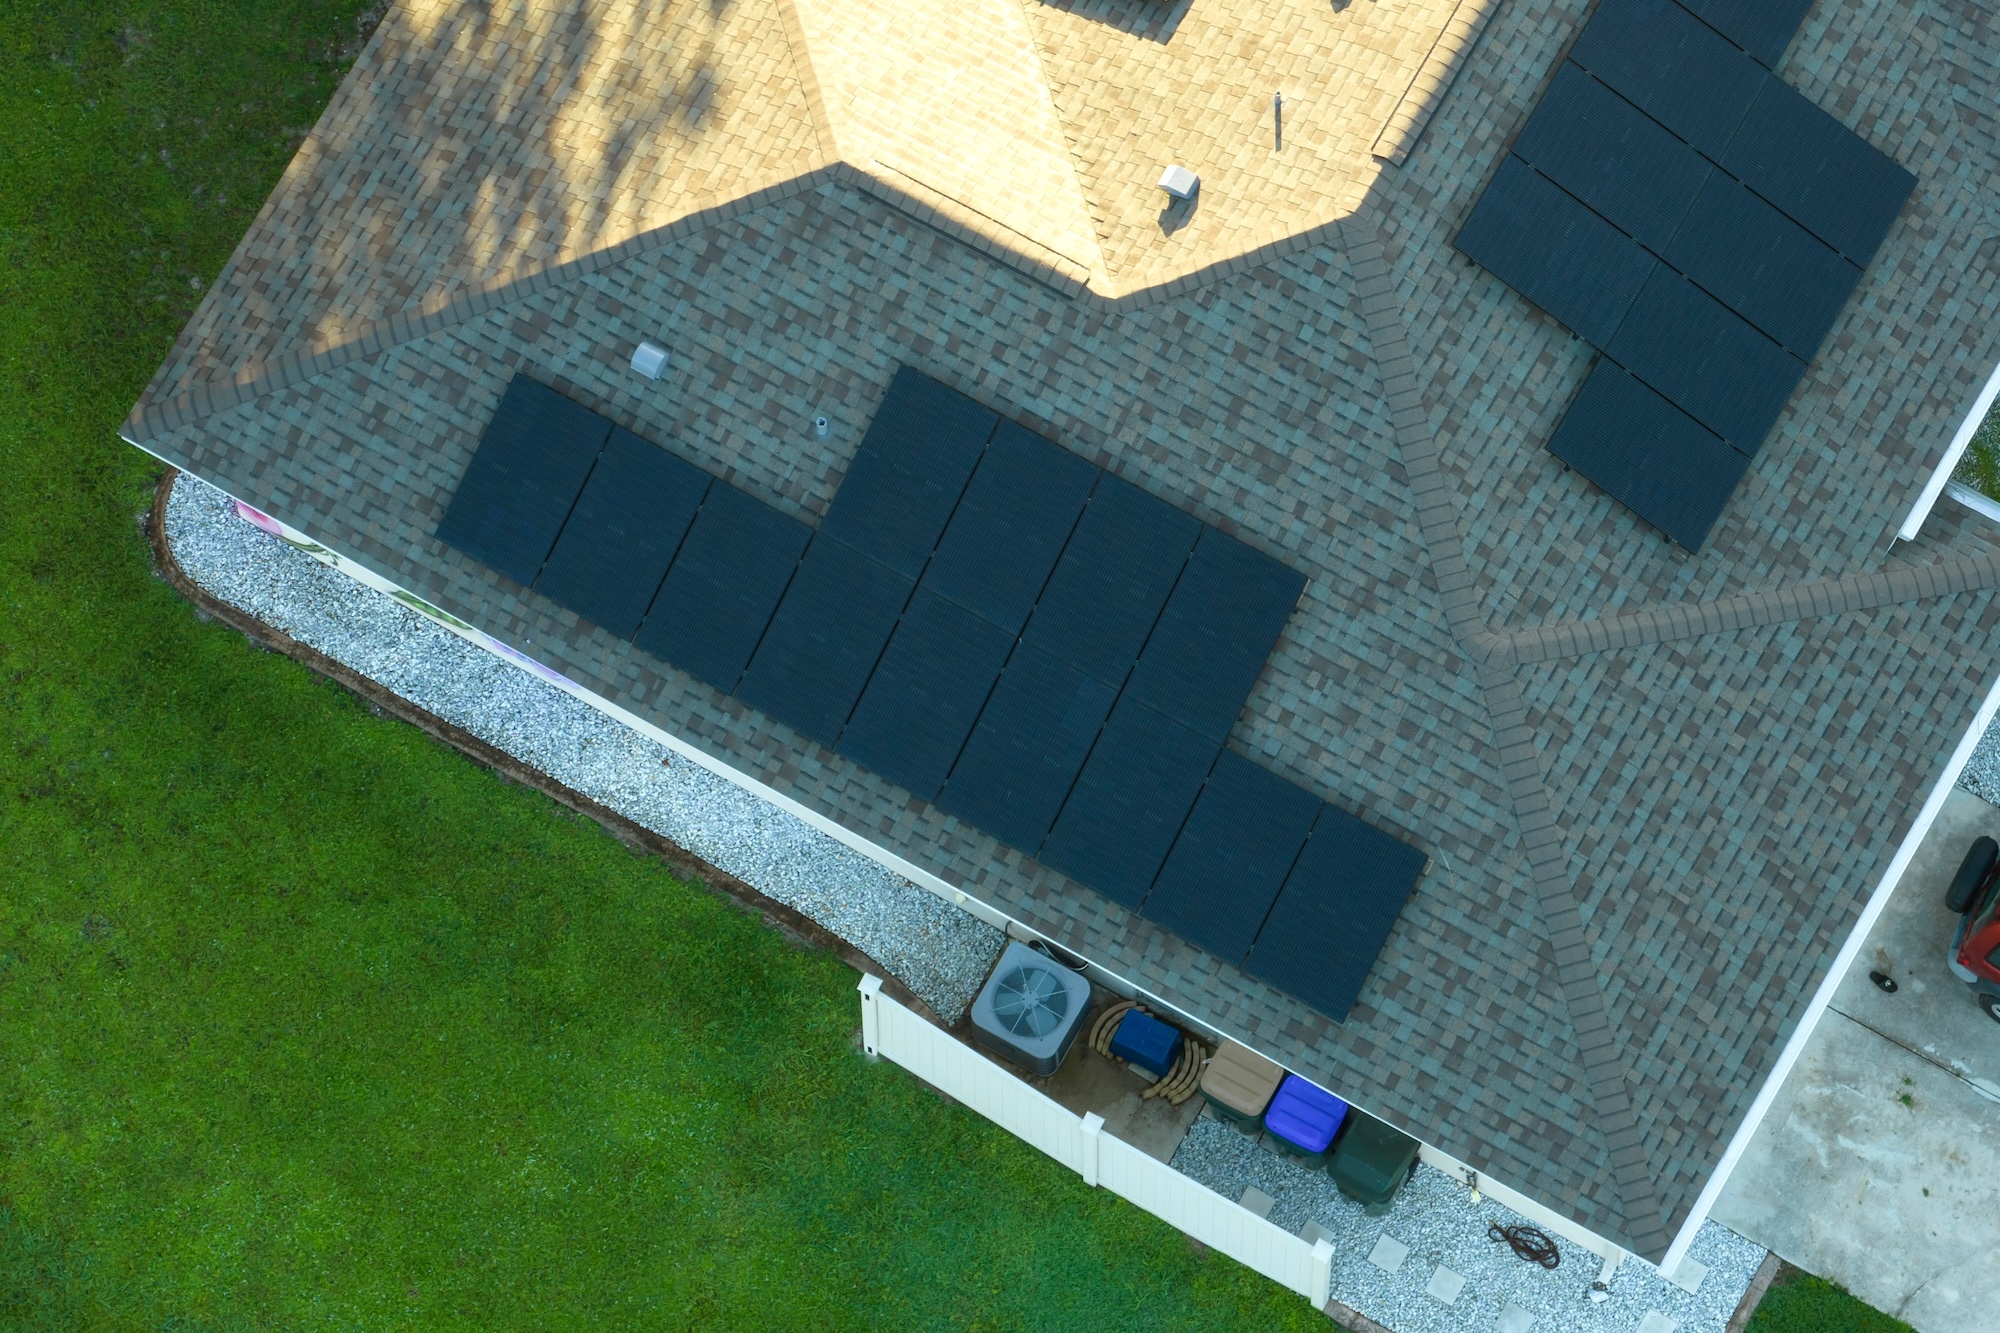 Drone image of residential rooftop with solar panels